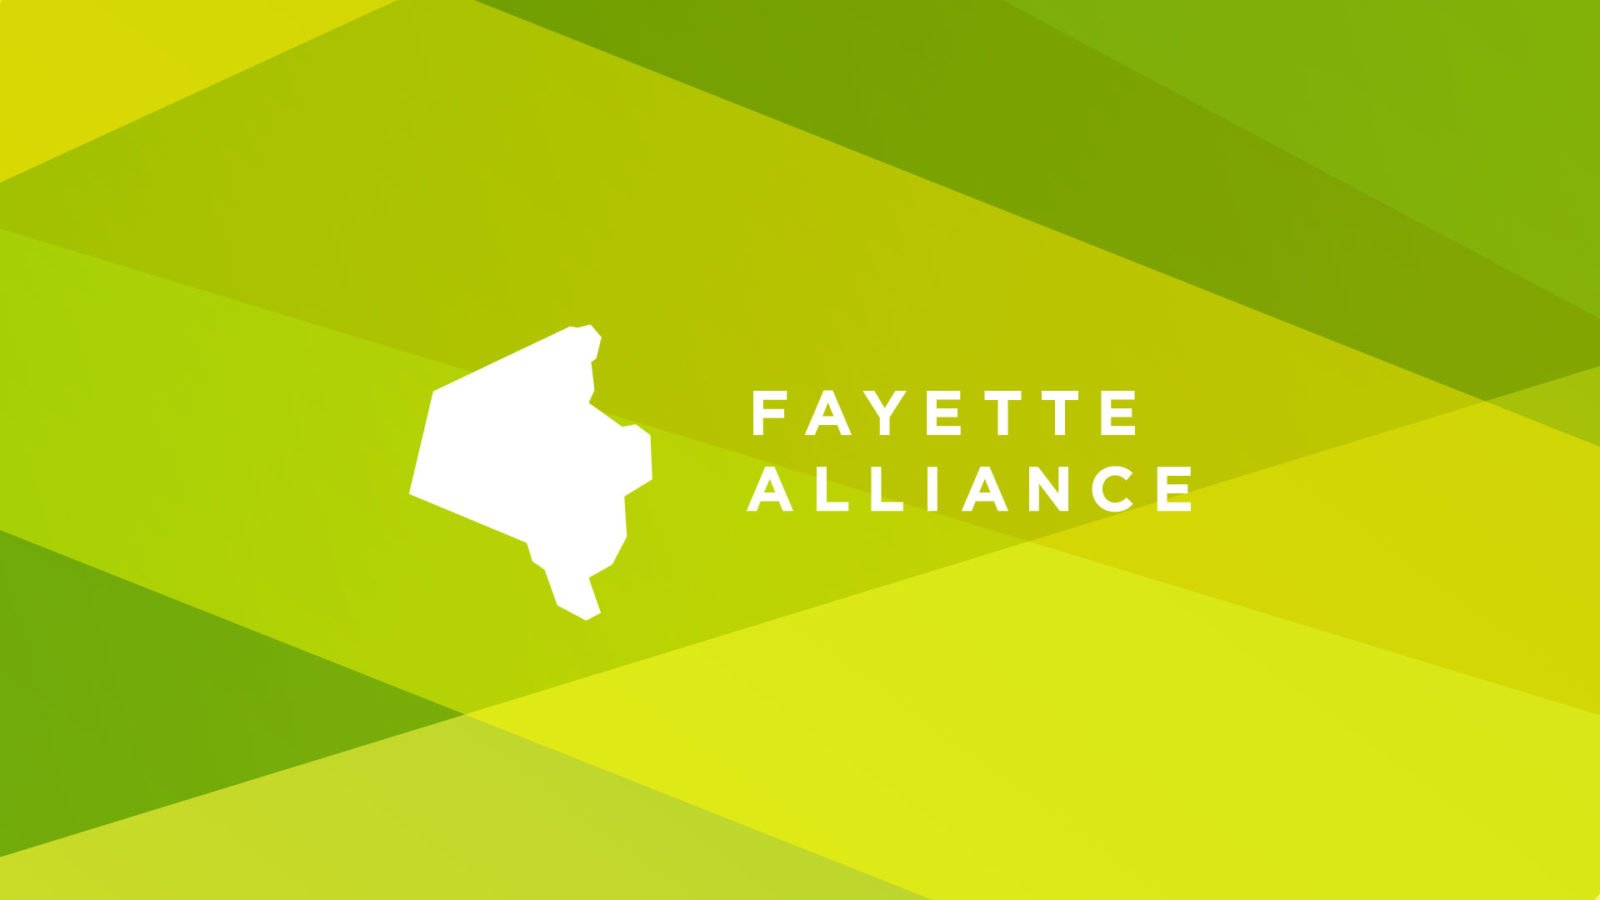 An Identity for the Fayette Alliance By Bullhorn Creative